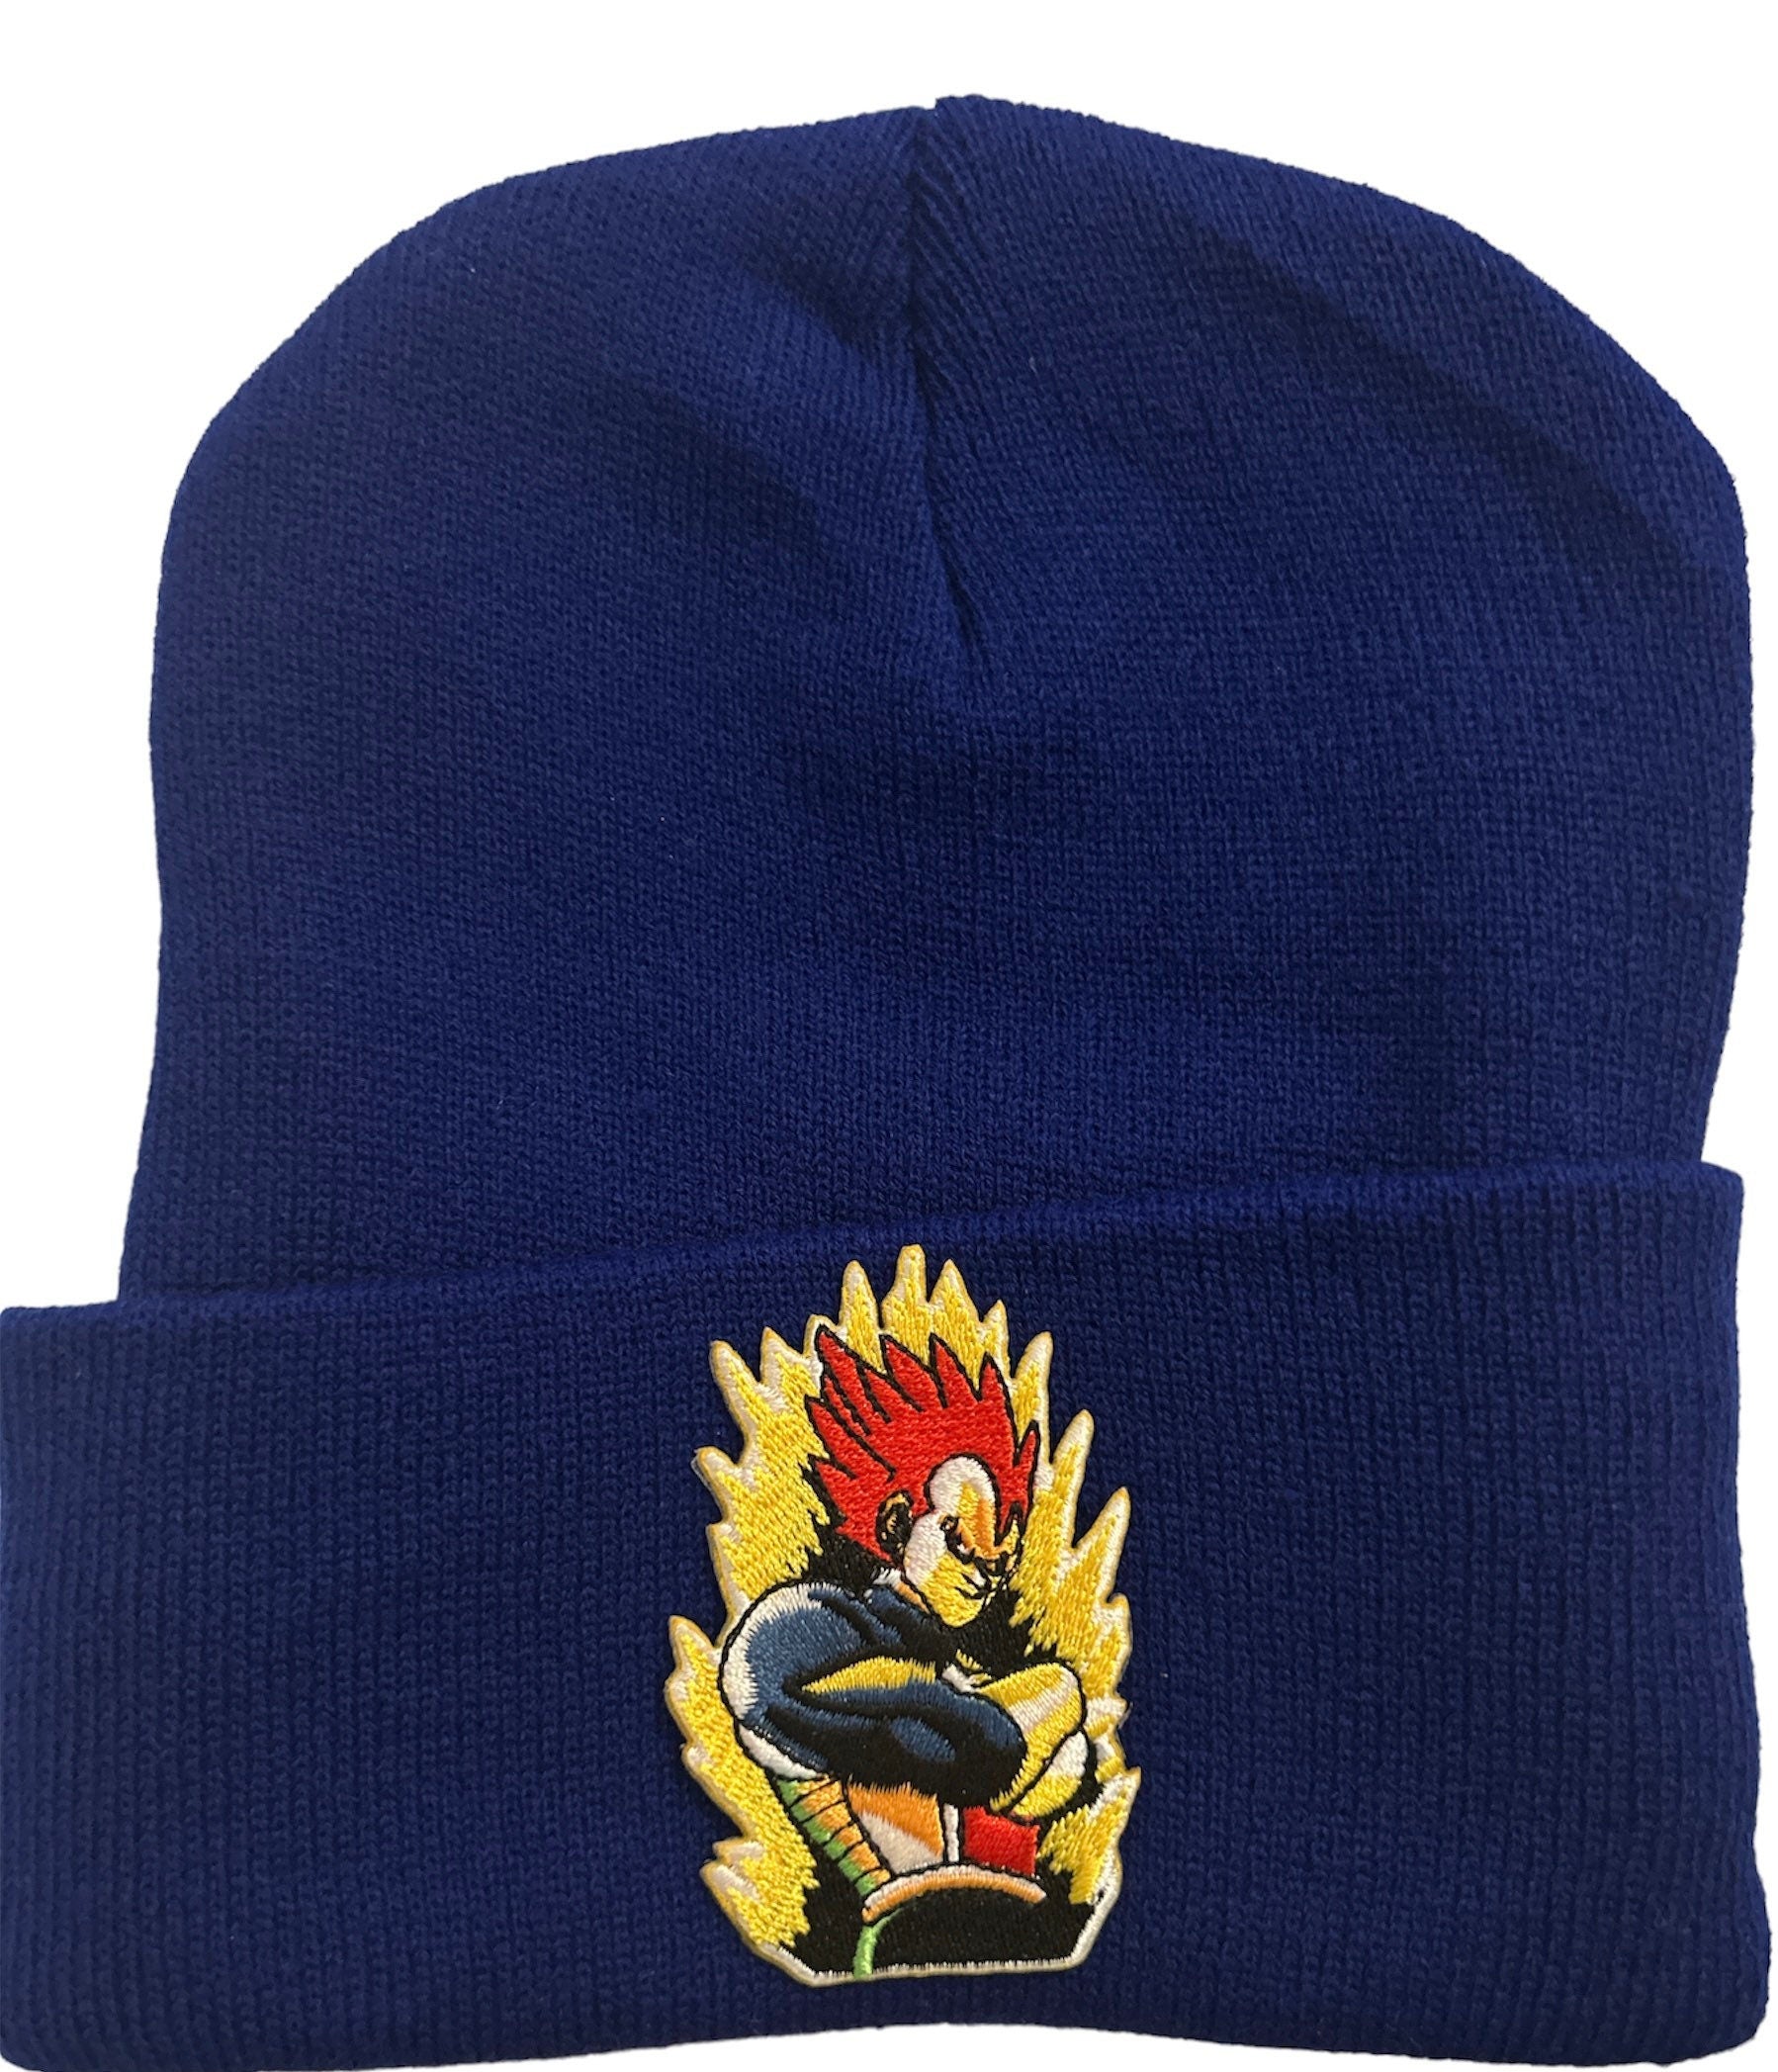 Unisex Knit Beanie with Embroidered Patch|Custom Beanies